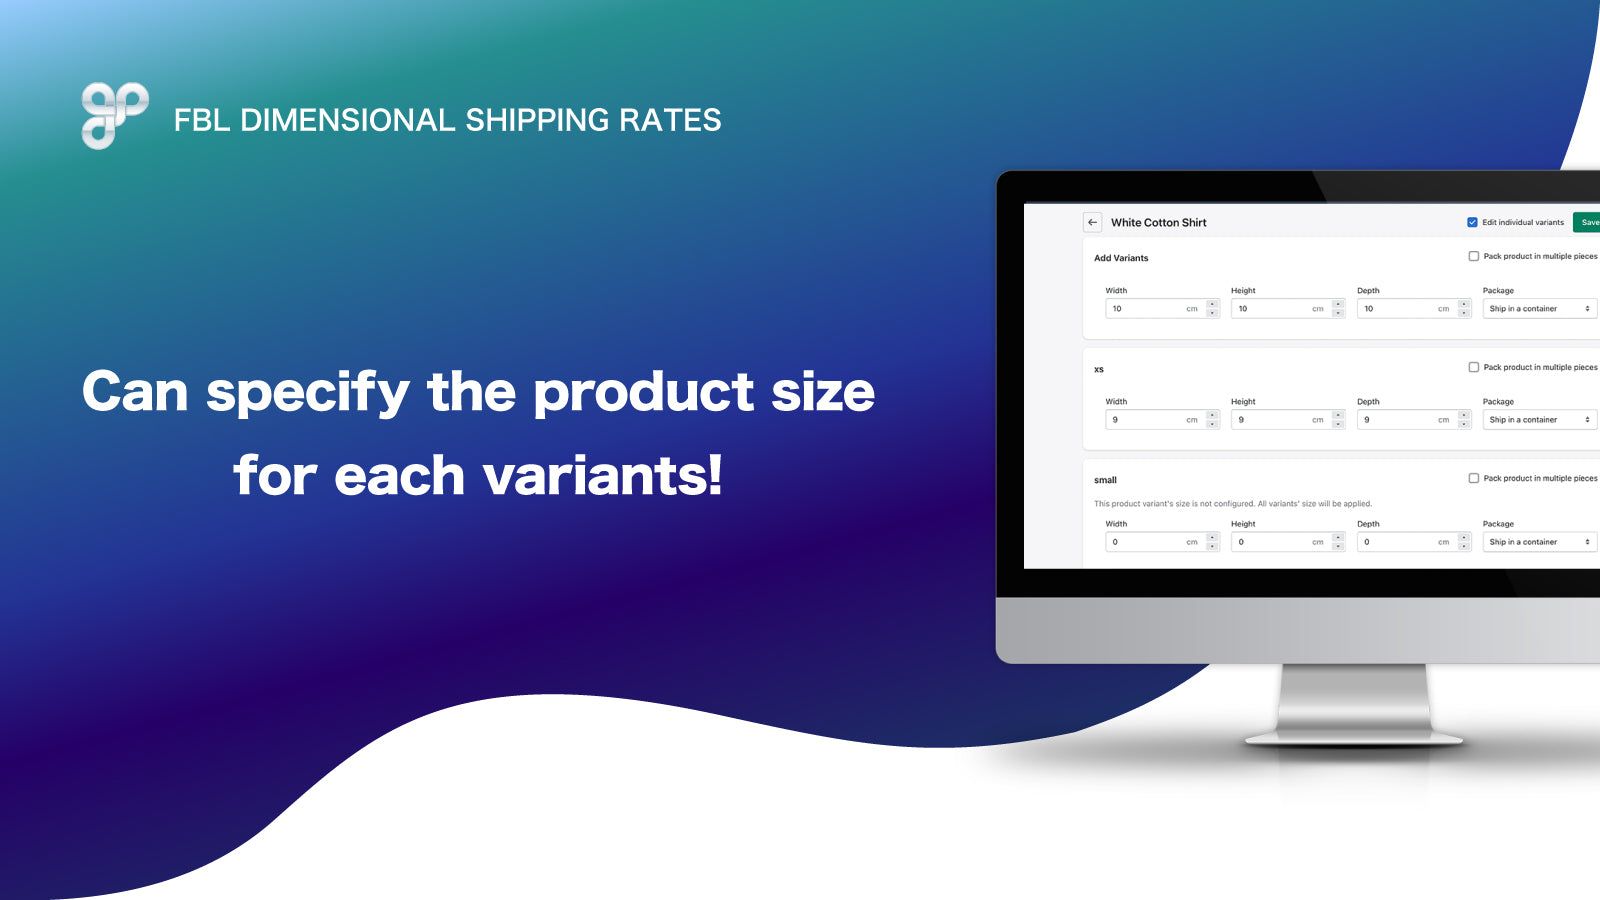 Can specify the product size for each variants!